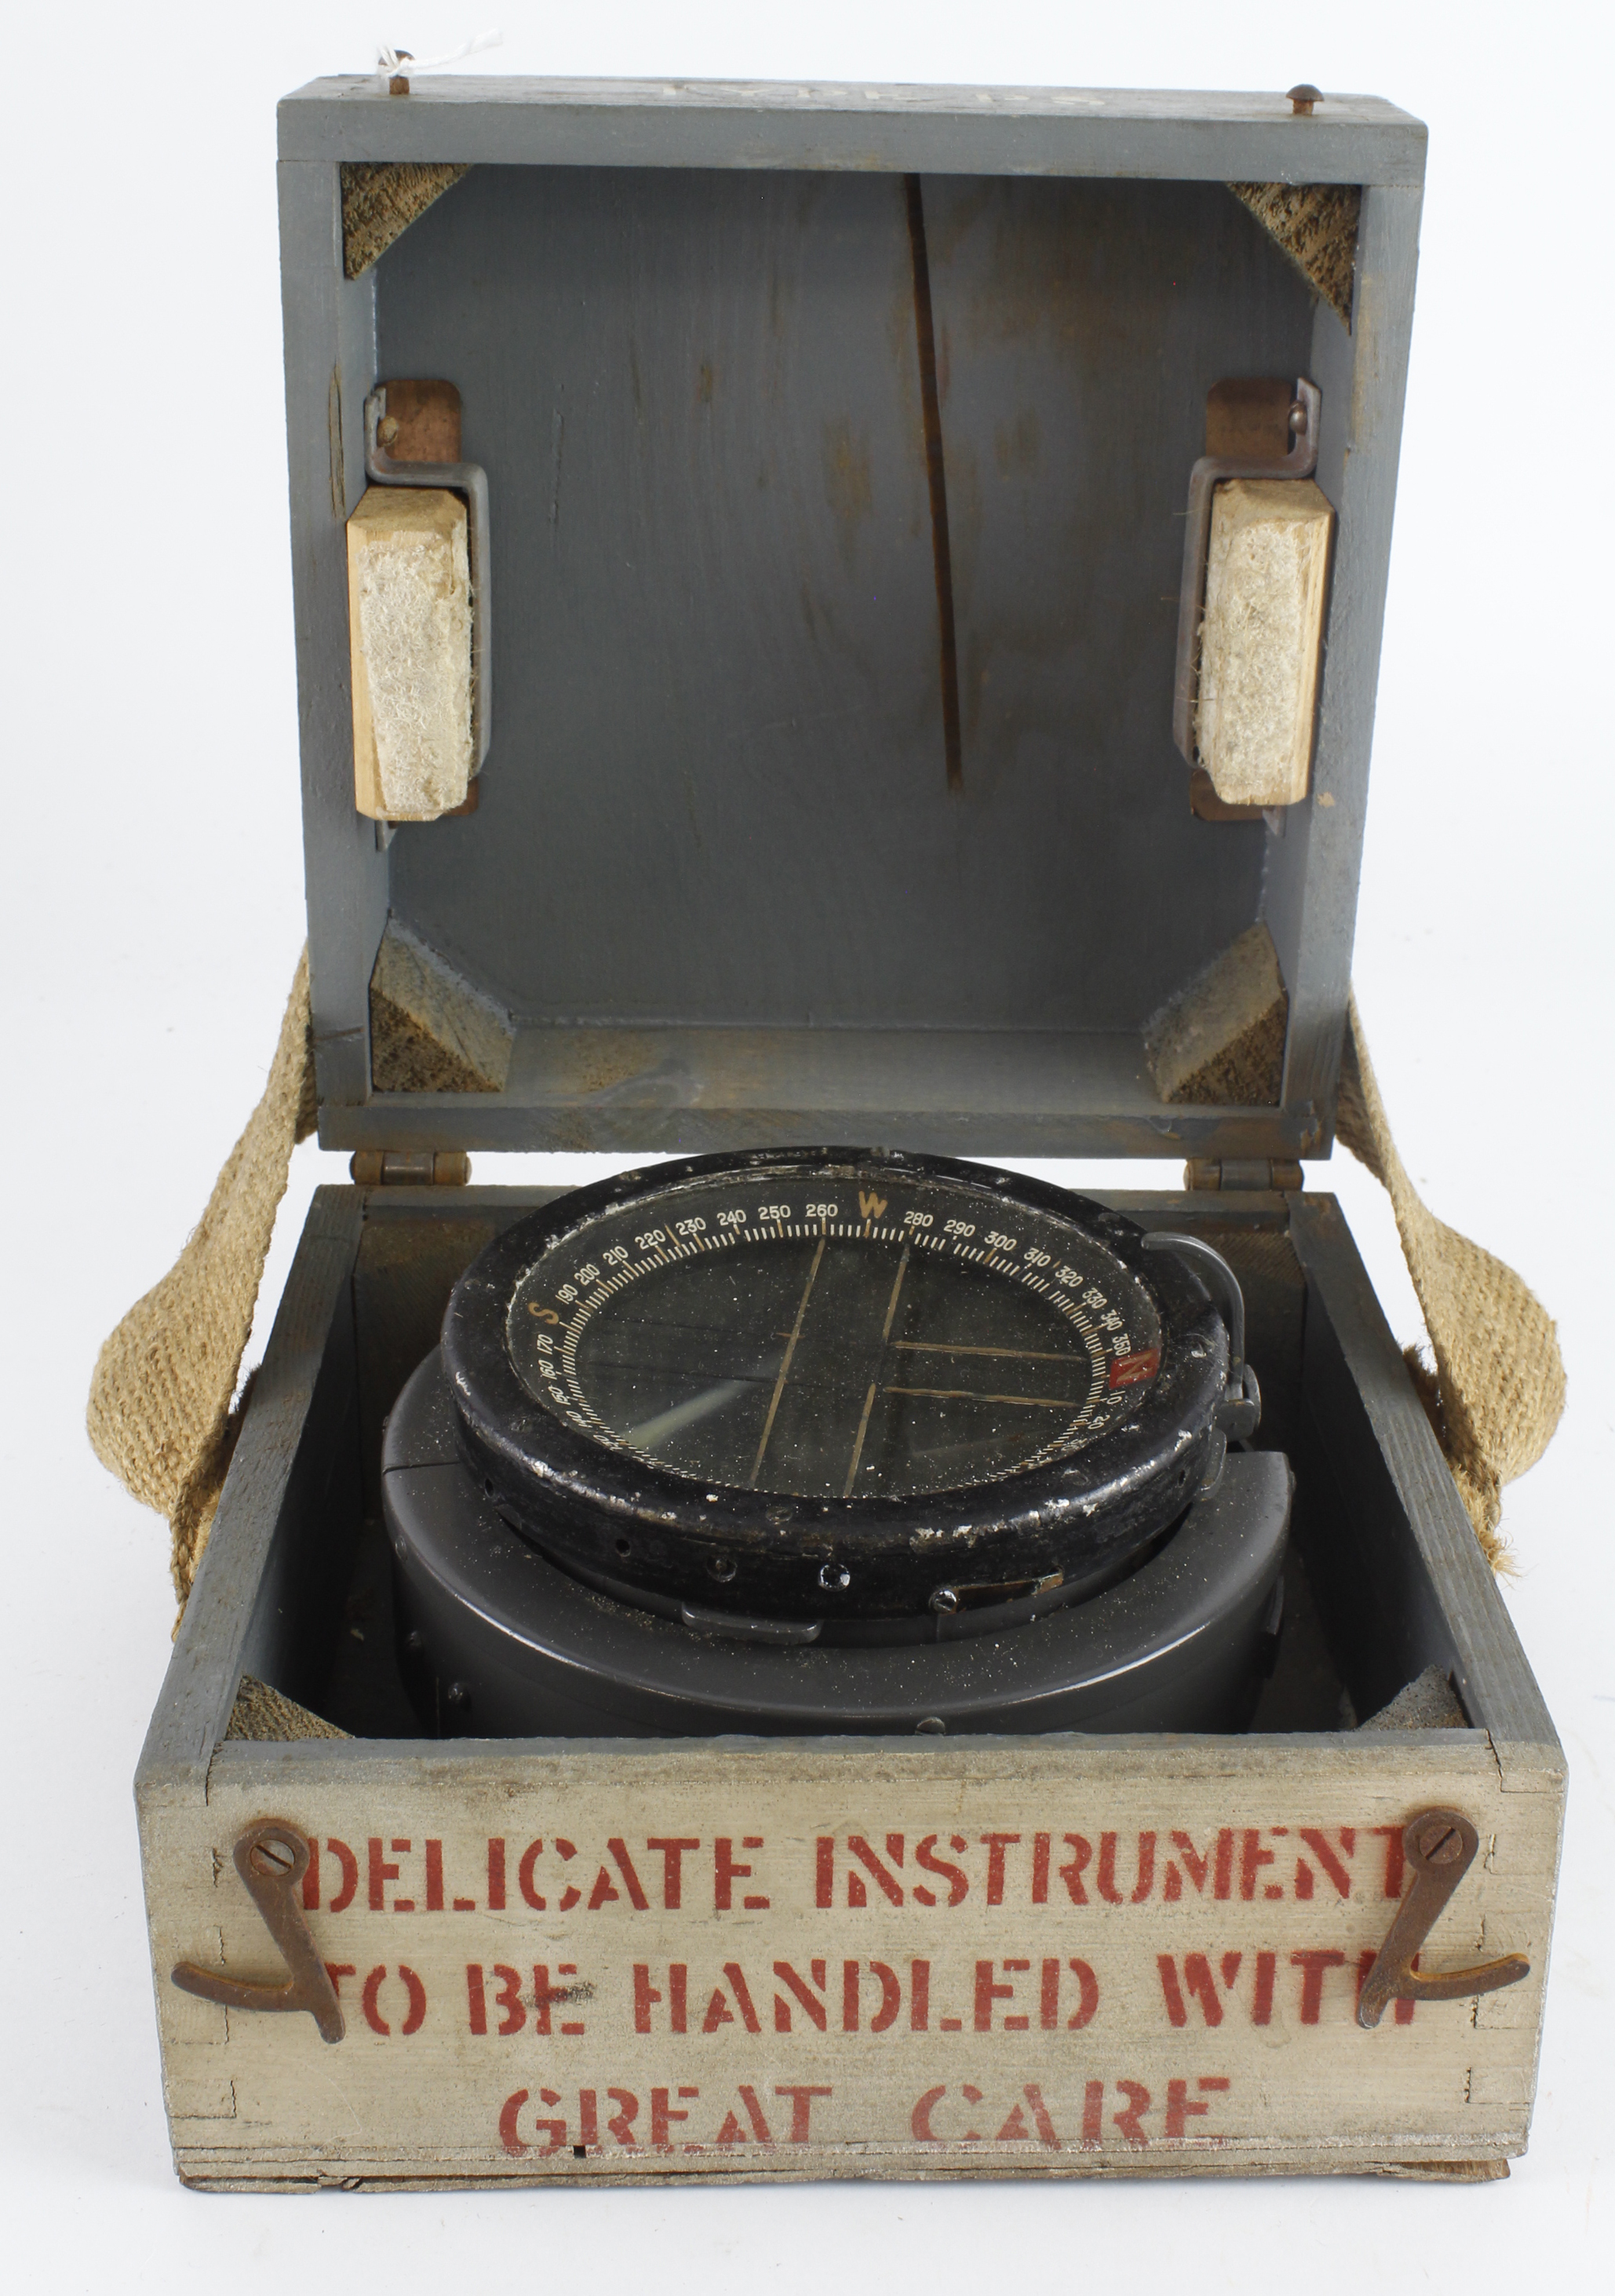 RAF WW2 P8 aircraft compass as fitted to fighters such as spitfires, hurricanes etc. In superb